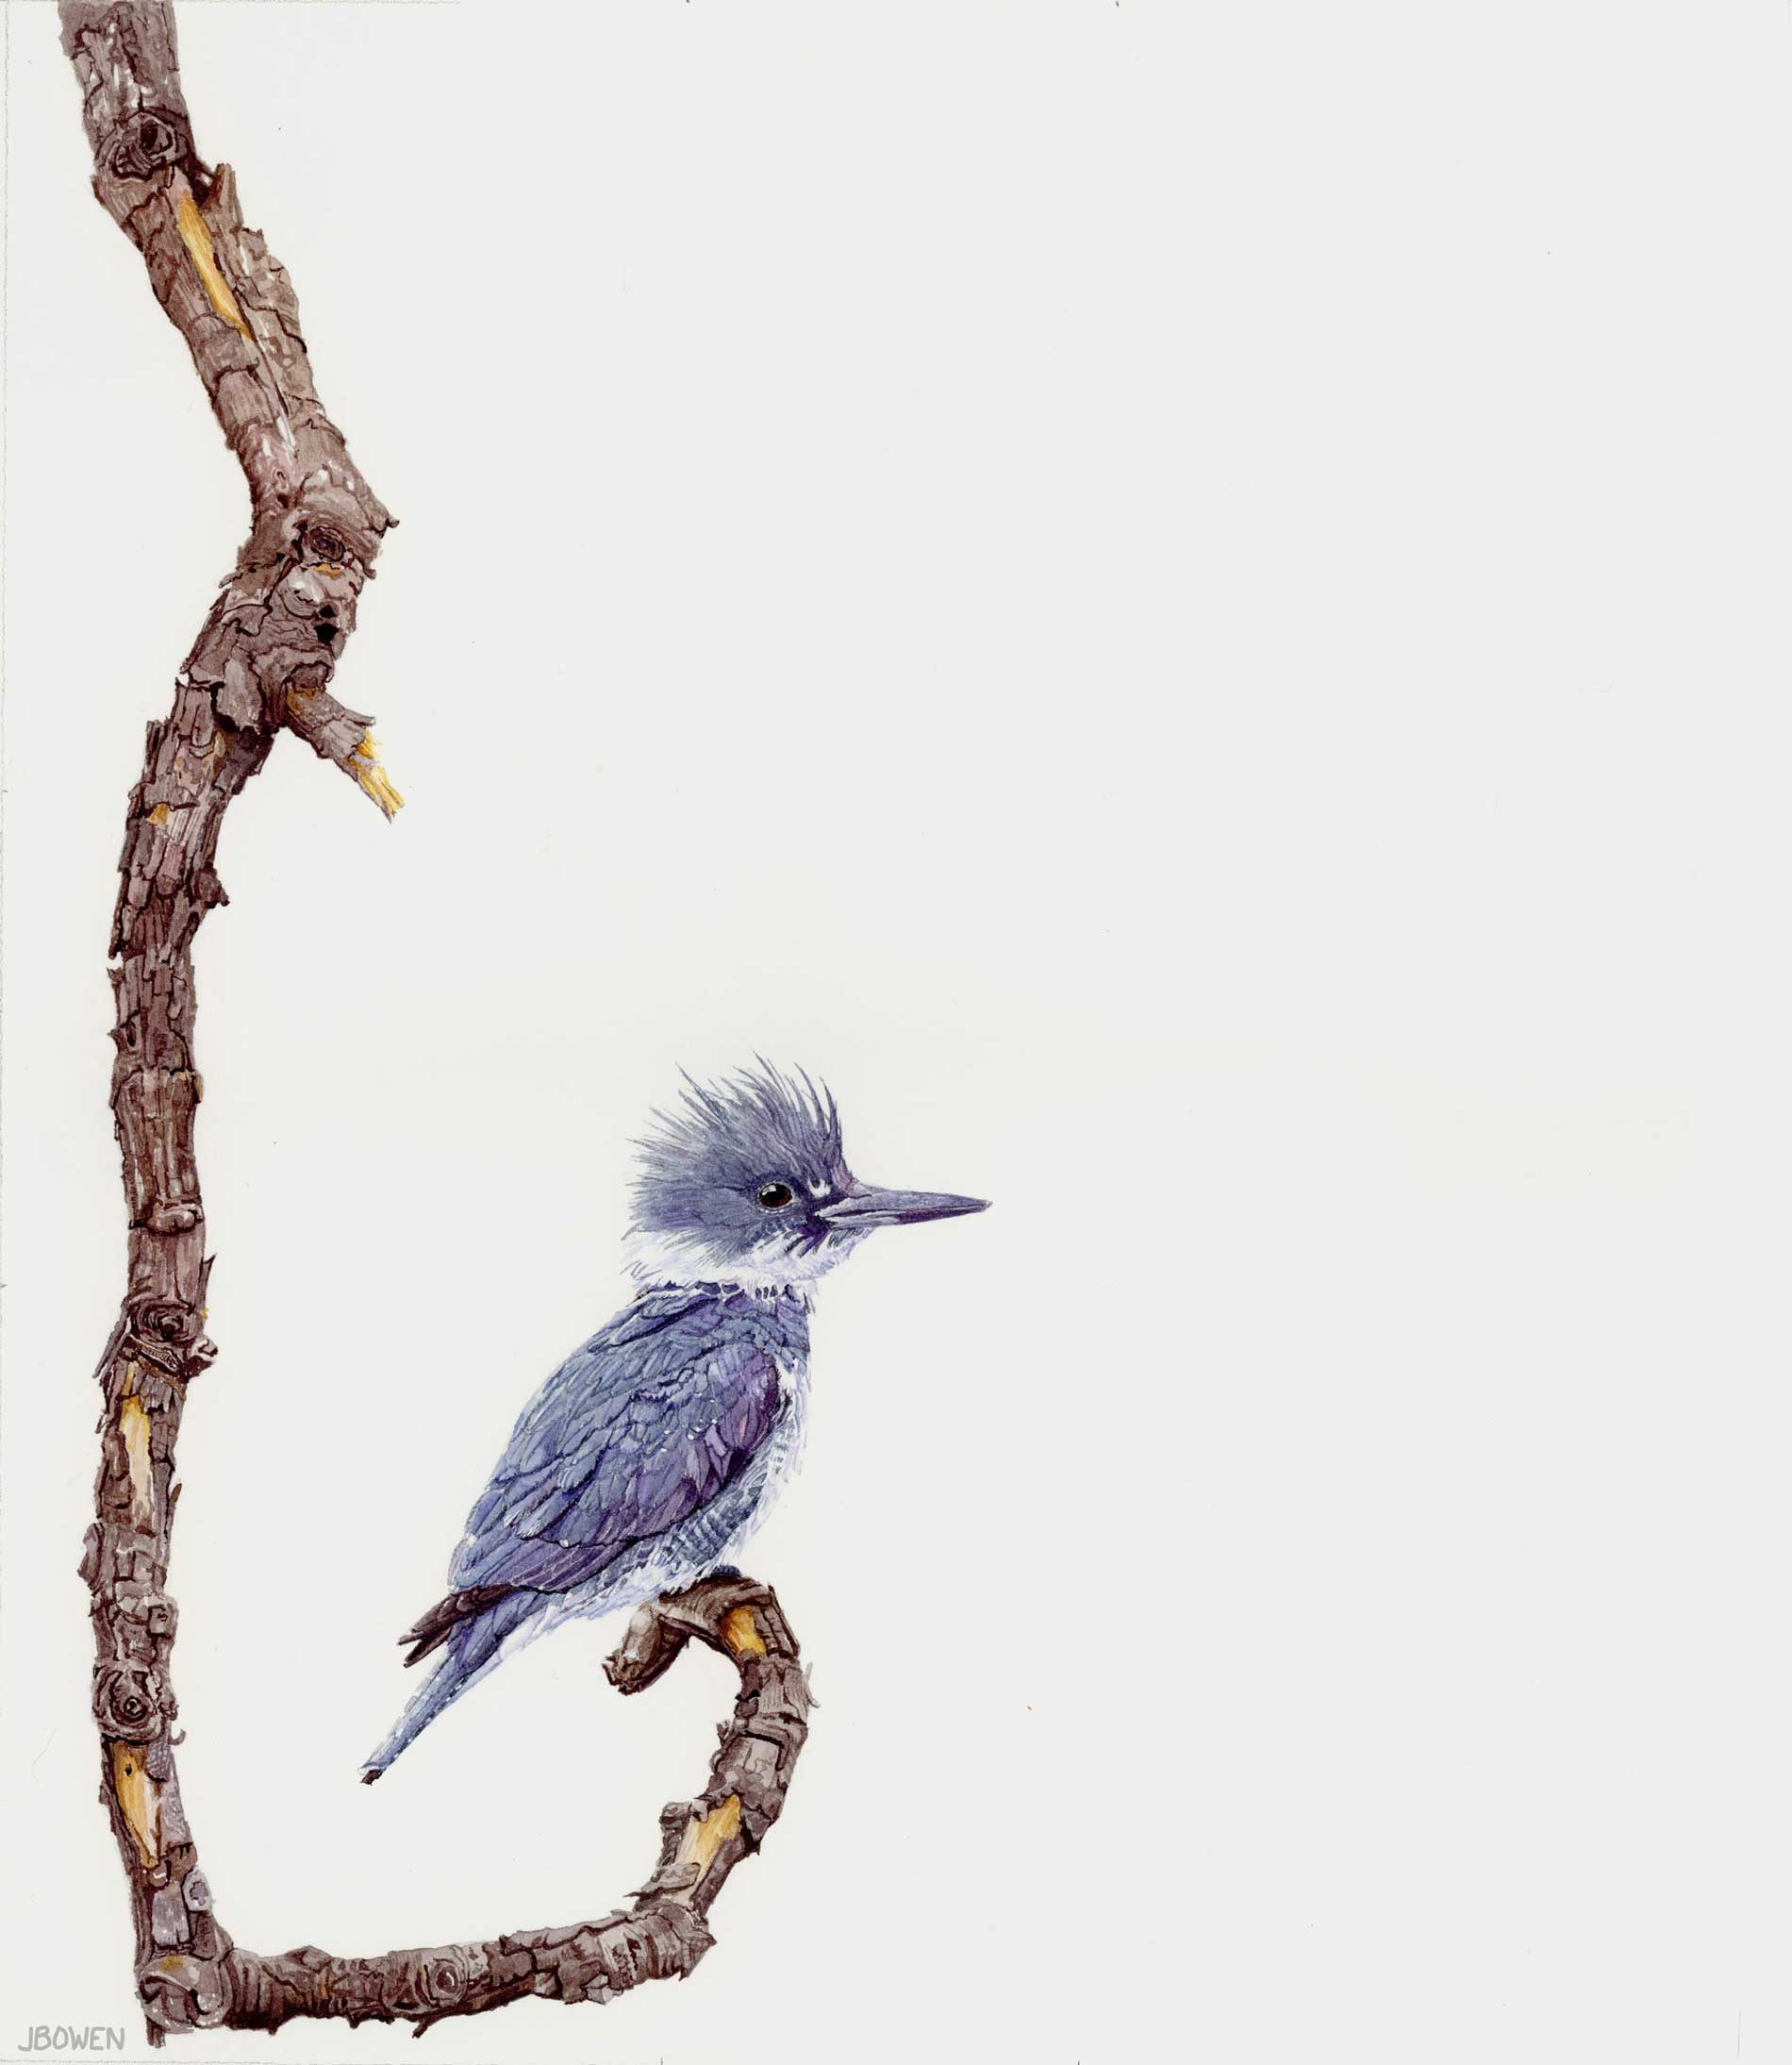 “The Watchman – Belted Kingfisher”